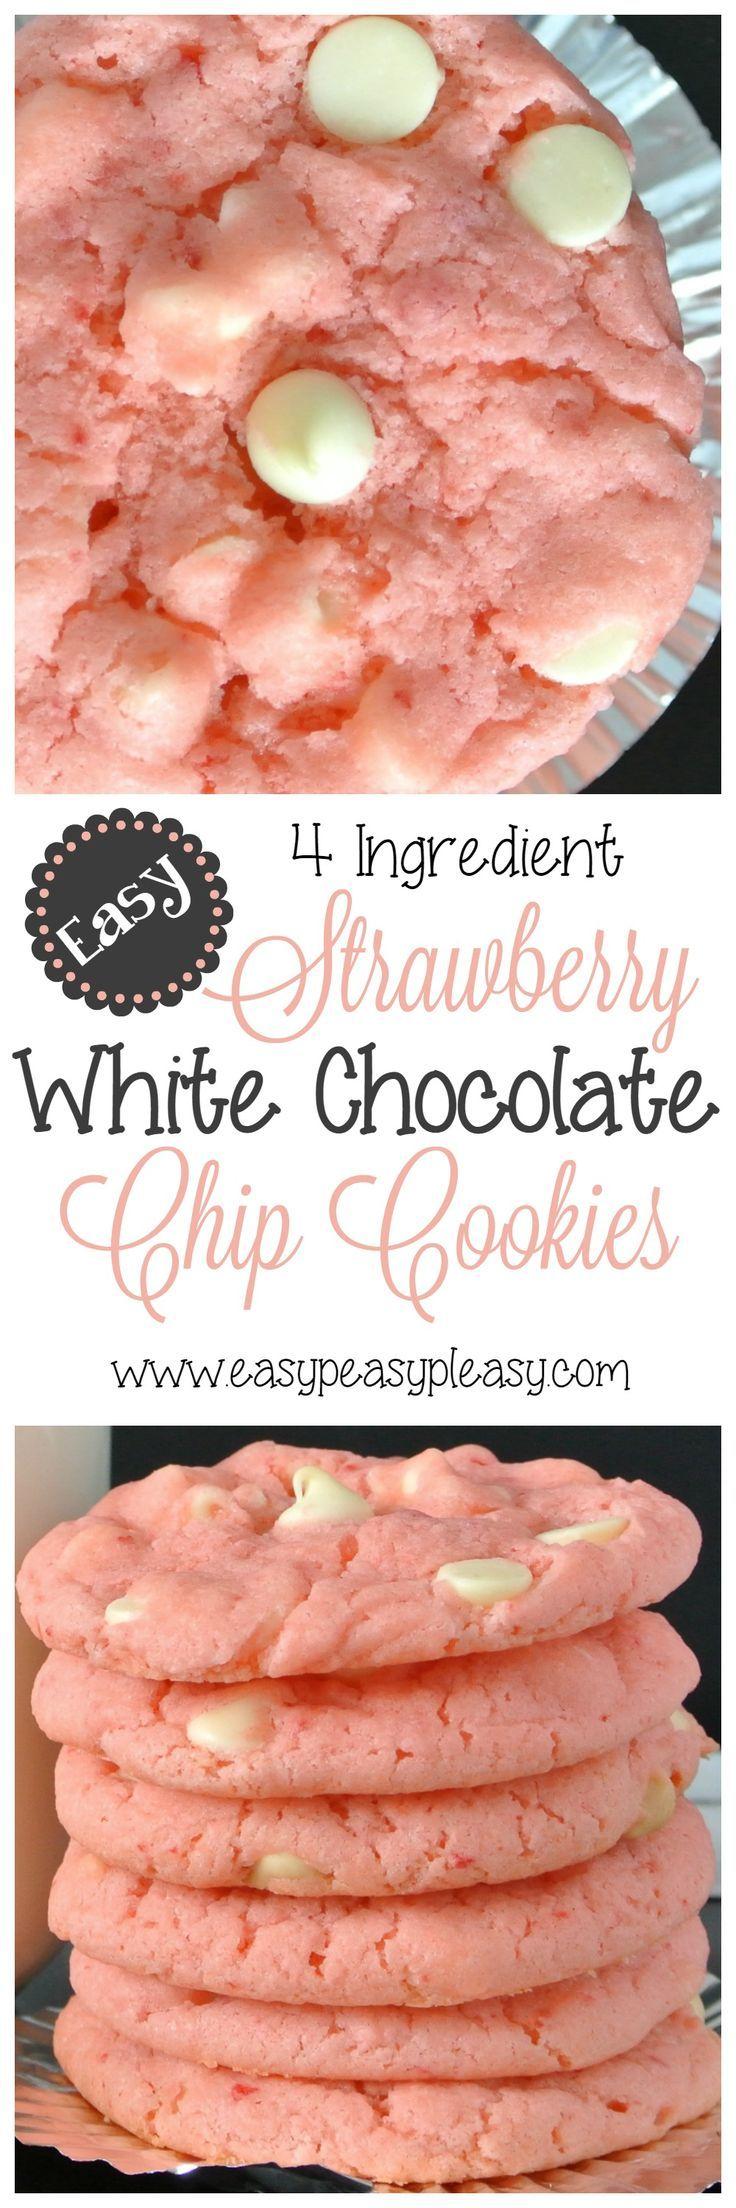 Mariage - 4 Ingredient Strawberry White Chocolate Chip Cookies